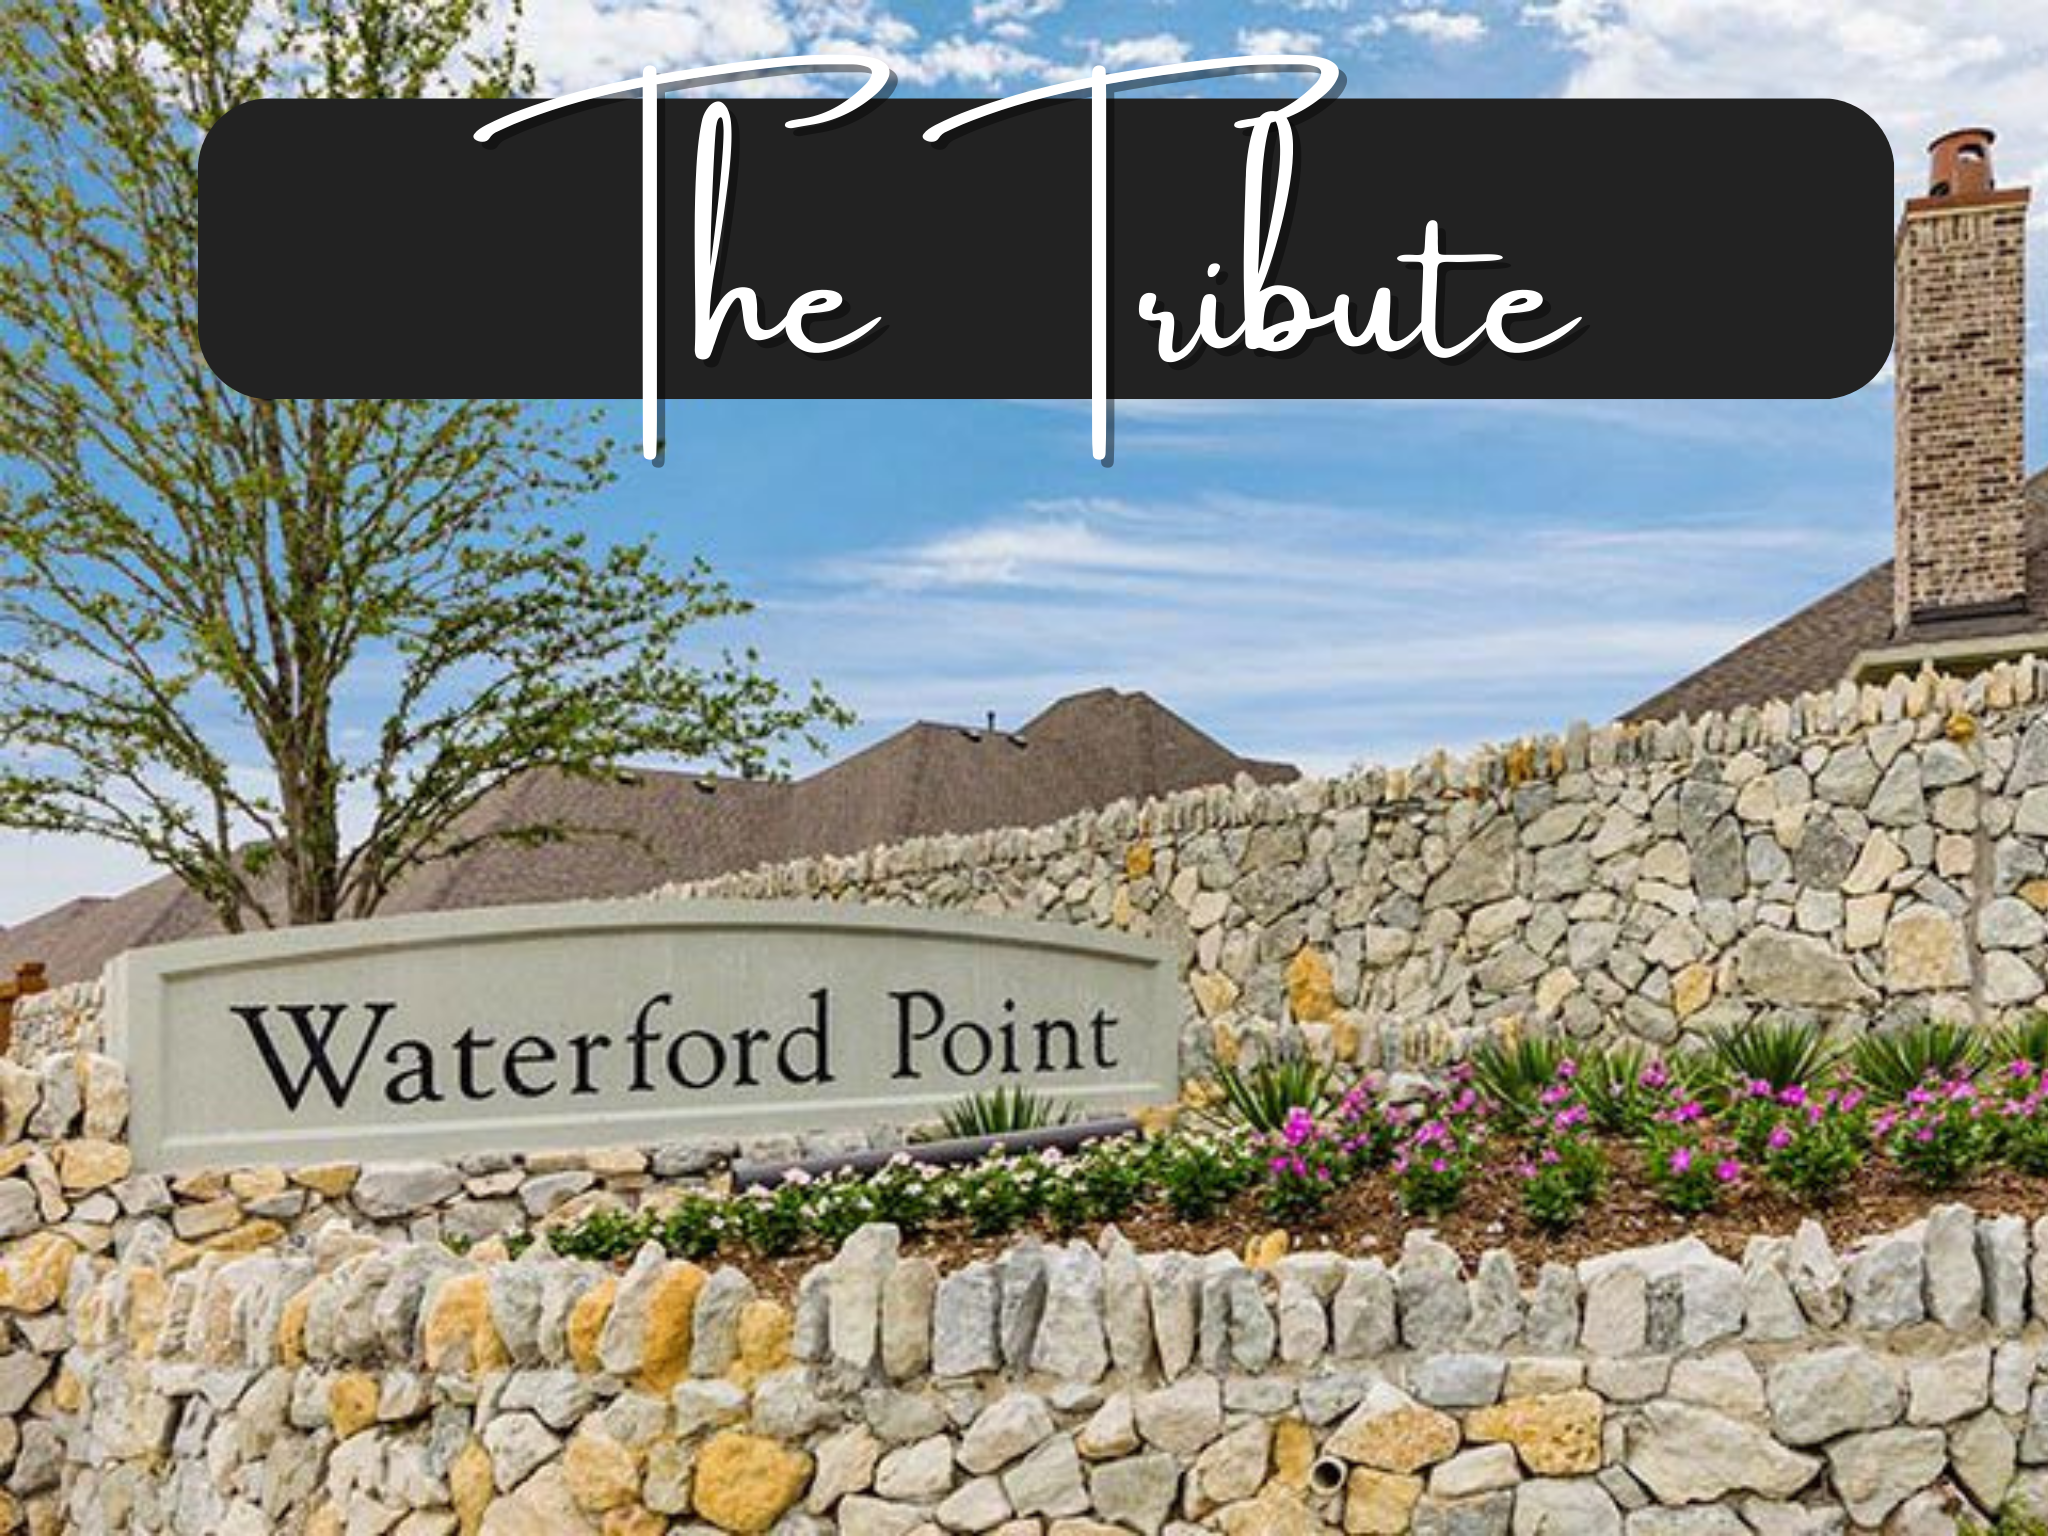 Waterford Point at The Tribute